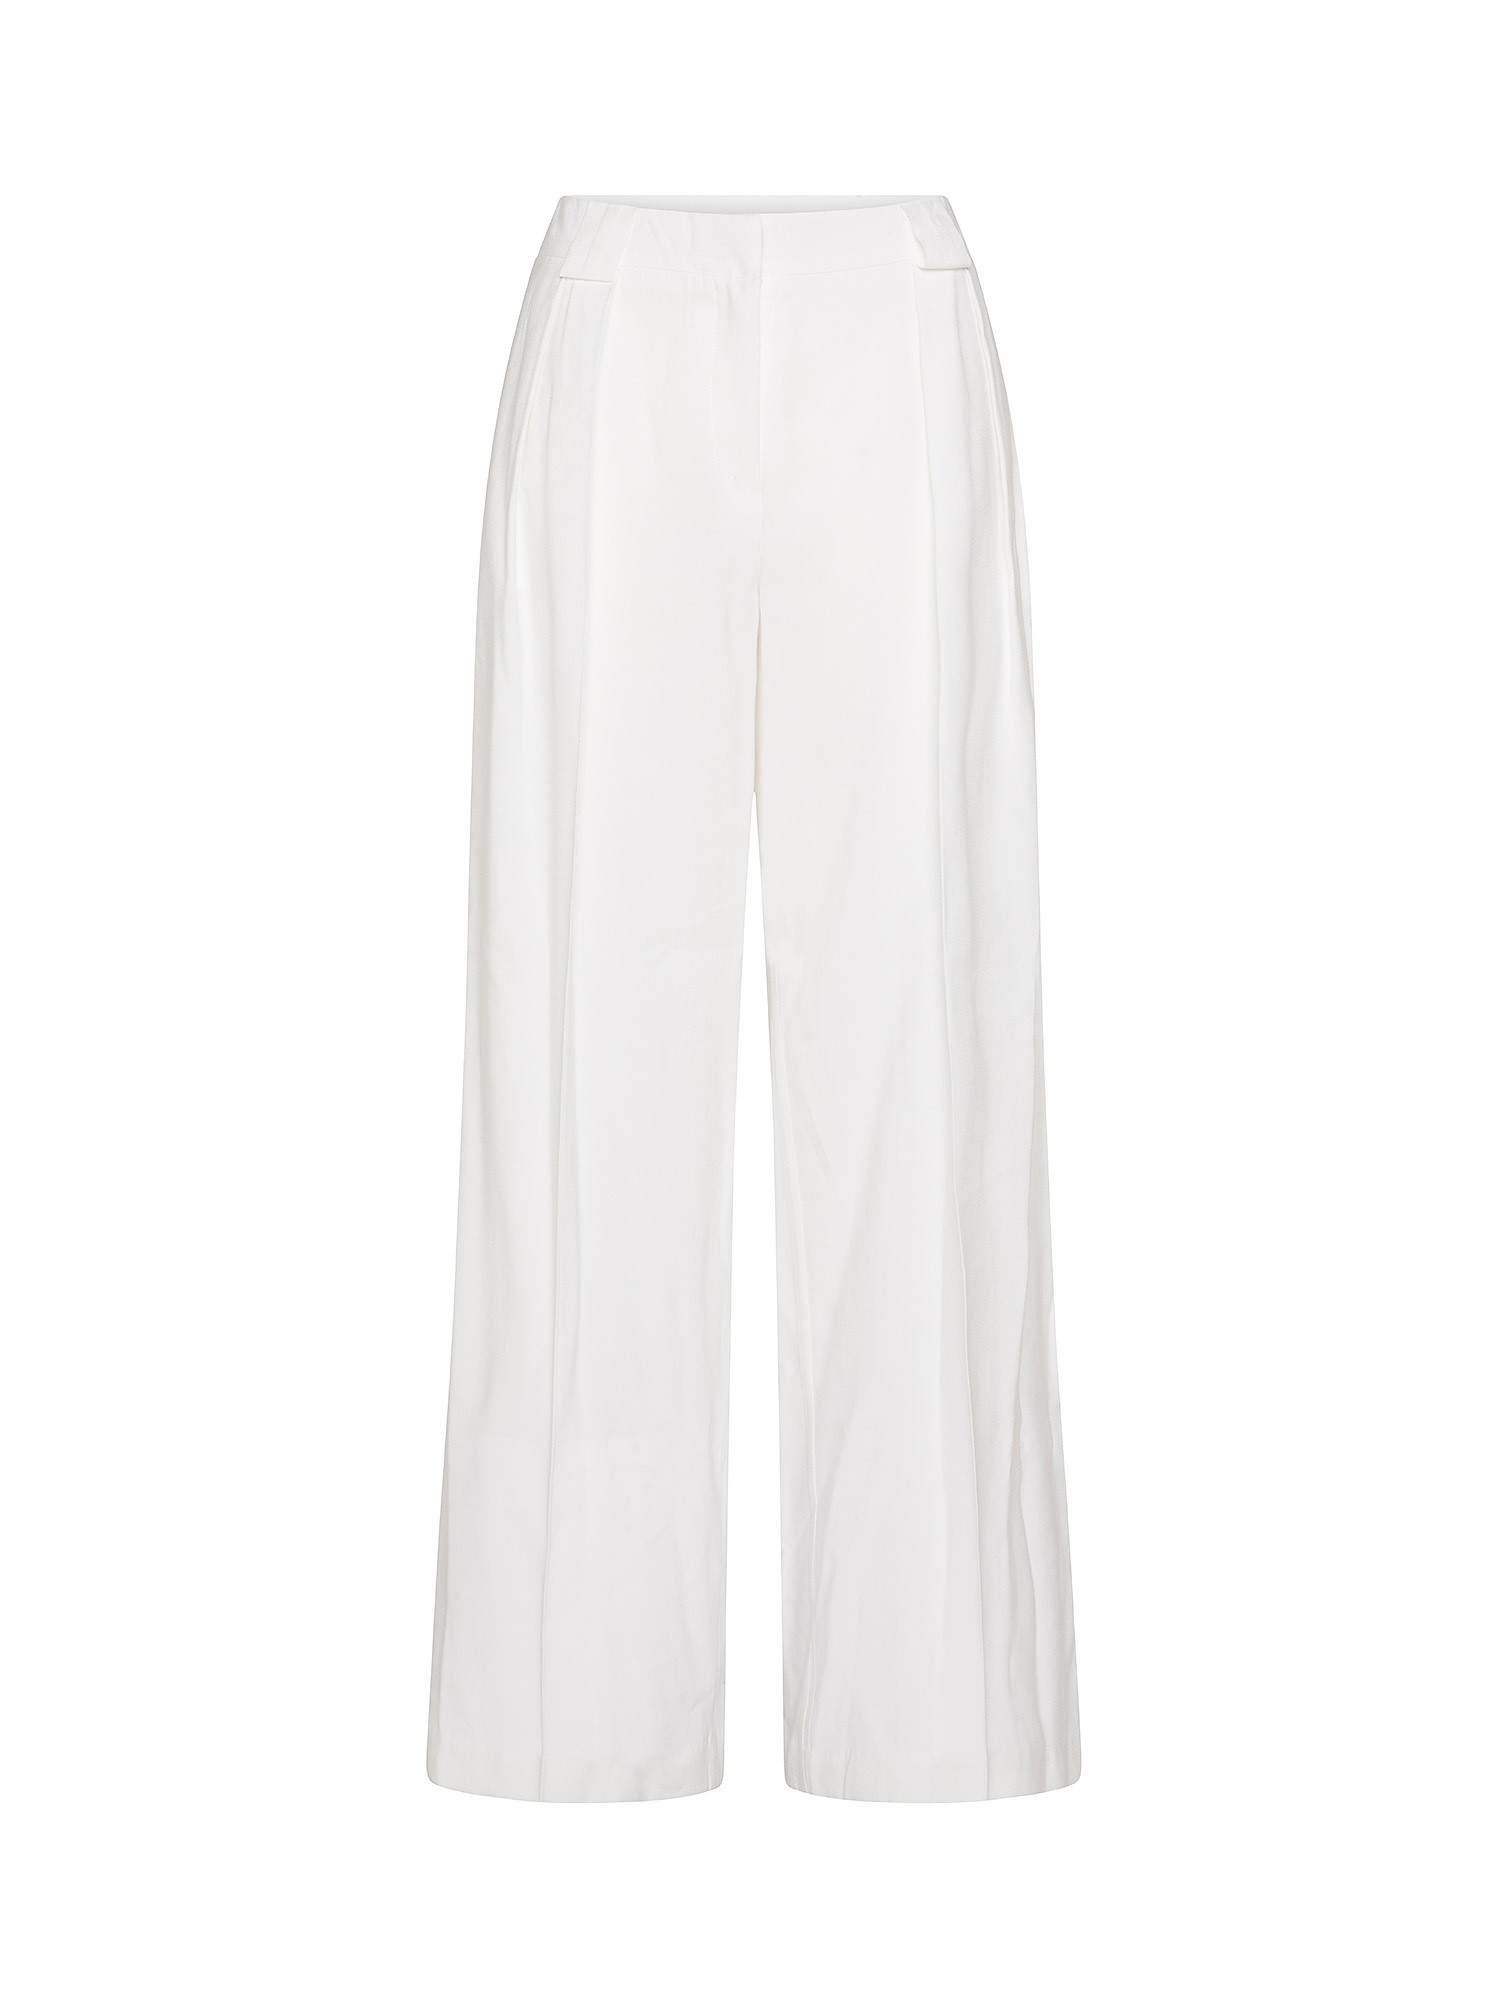 Trousers, White, large image number 0